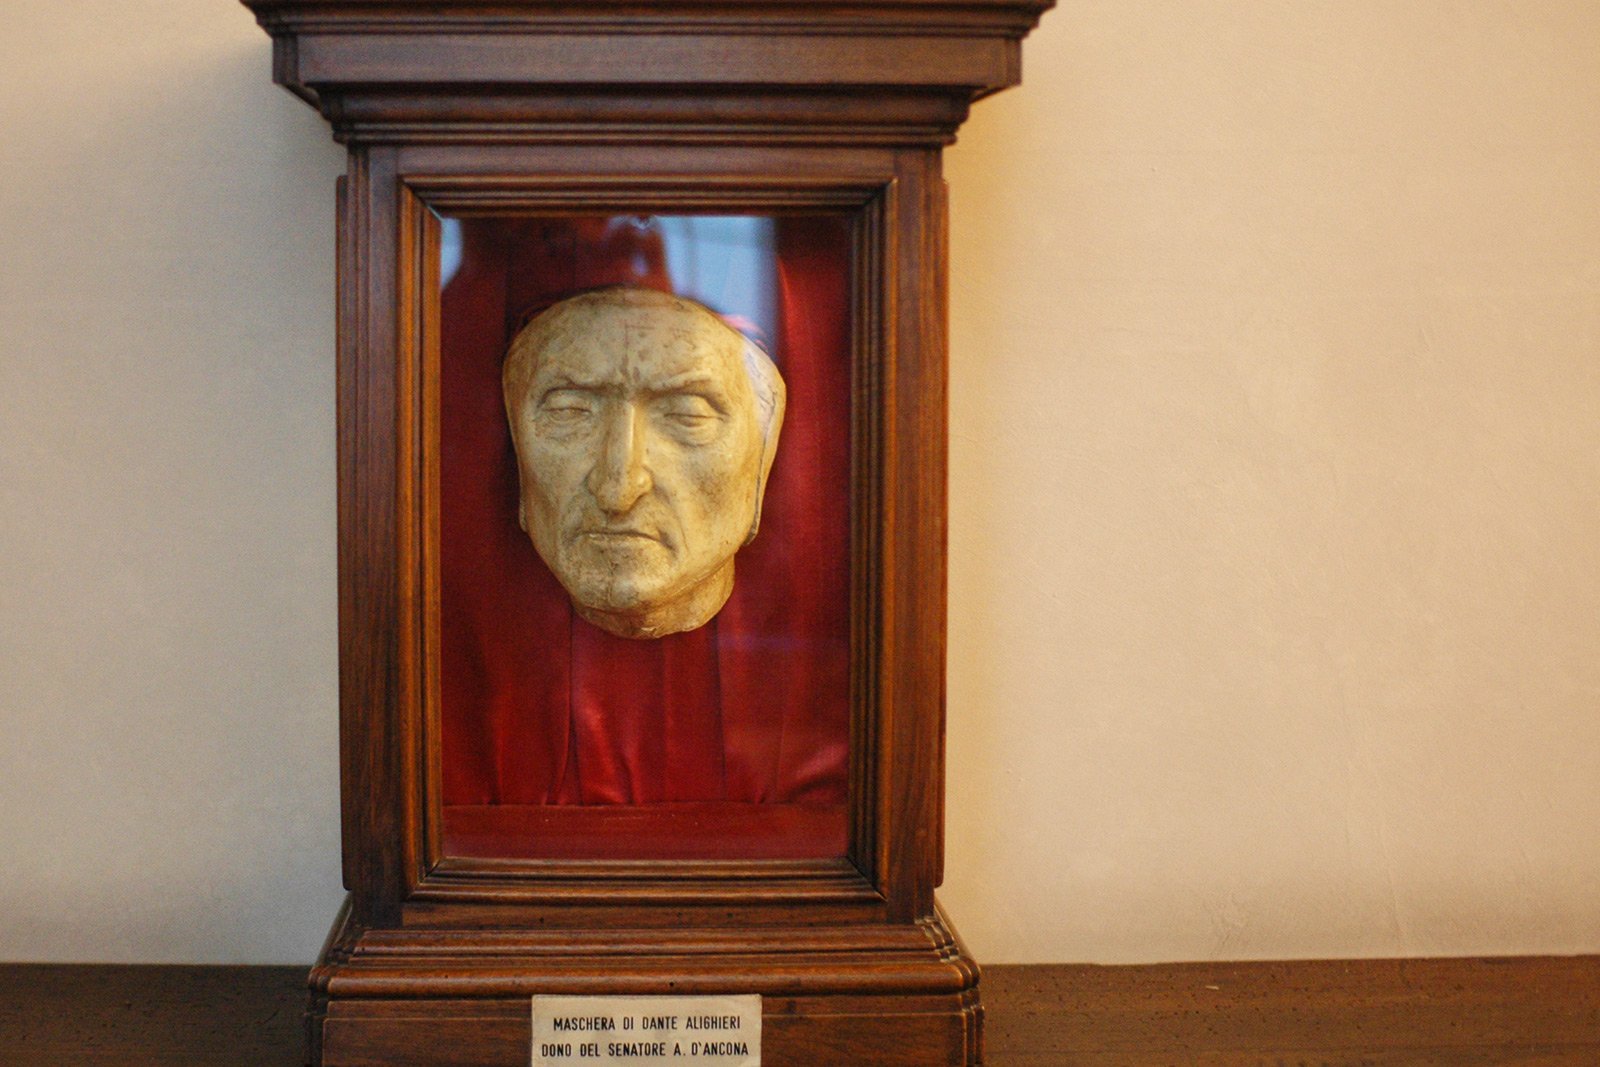 How to see the death mask of Dante in Florence